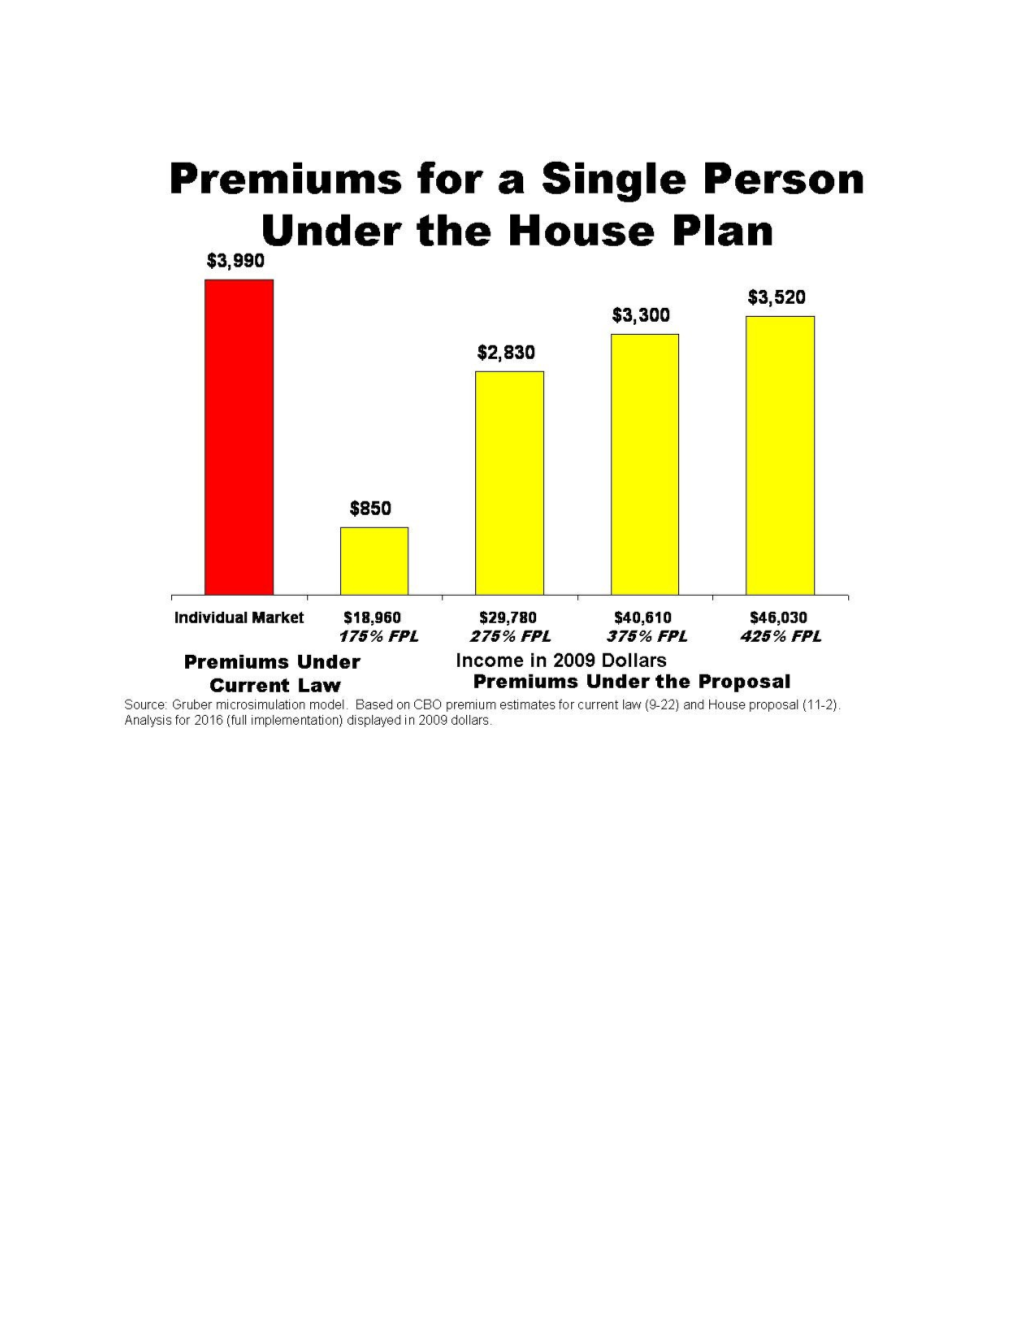 Impact of the Senate Finance Committee Proposal on Premiums